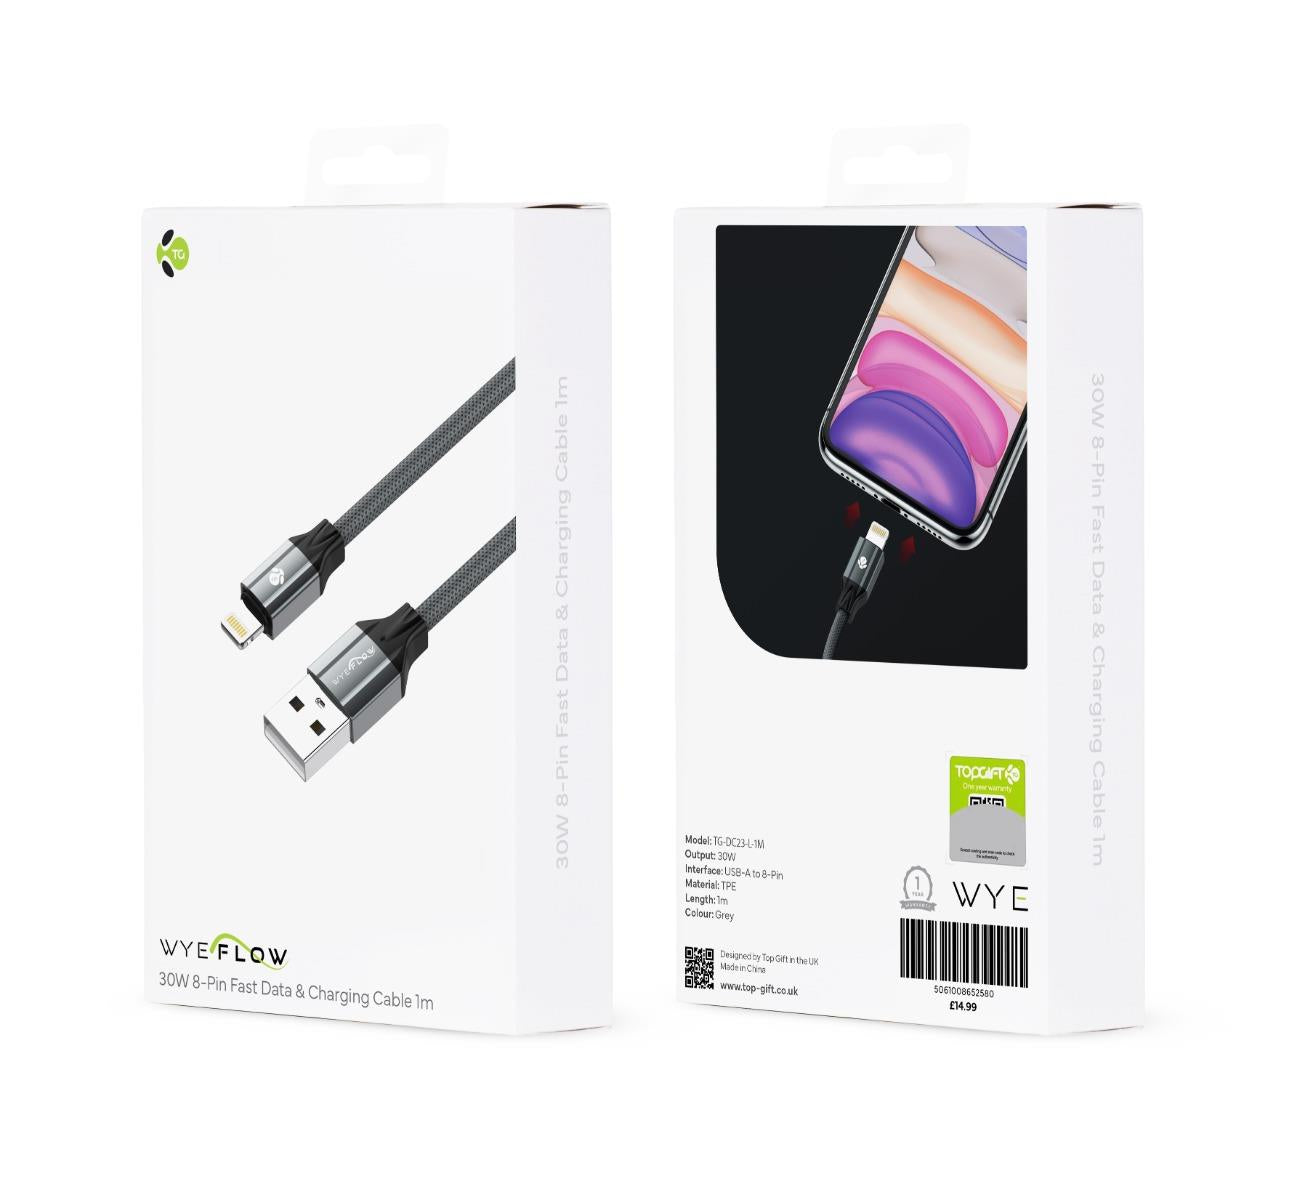 WYEFLOW 30W 8-Pin Fast Data & Charging Cable 1m